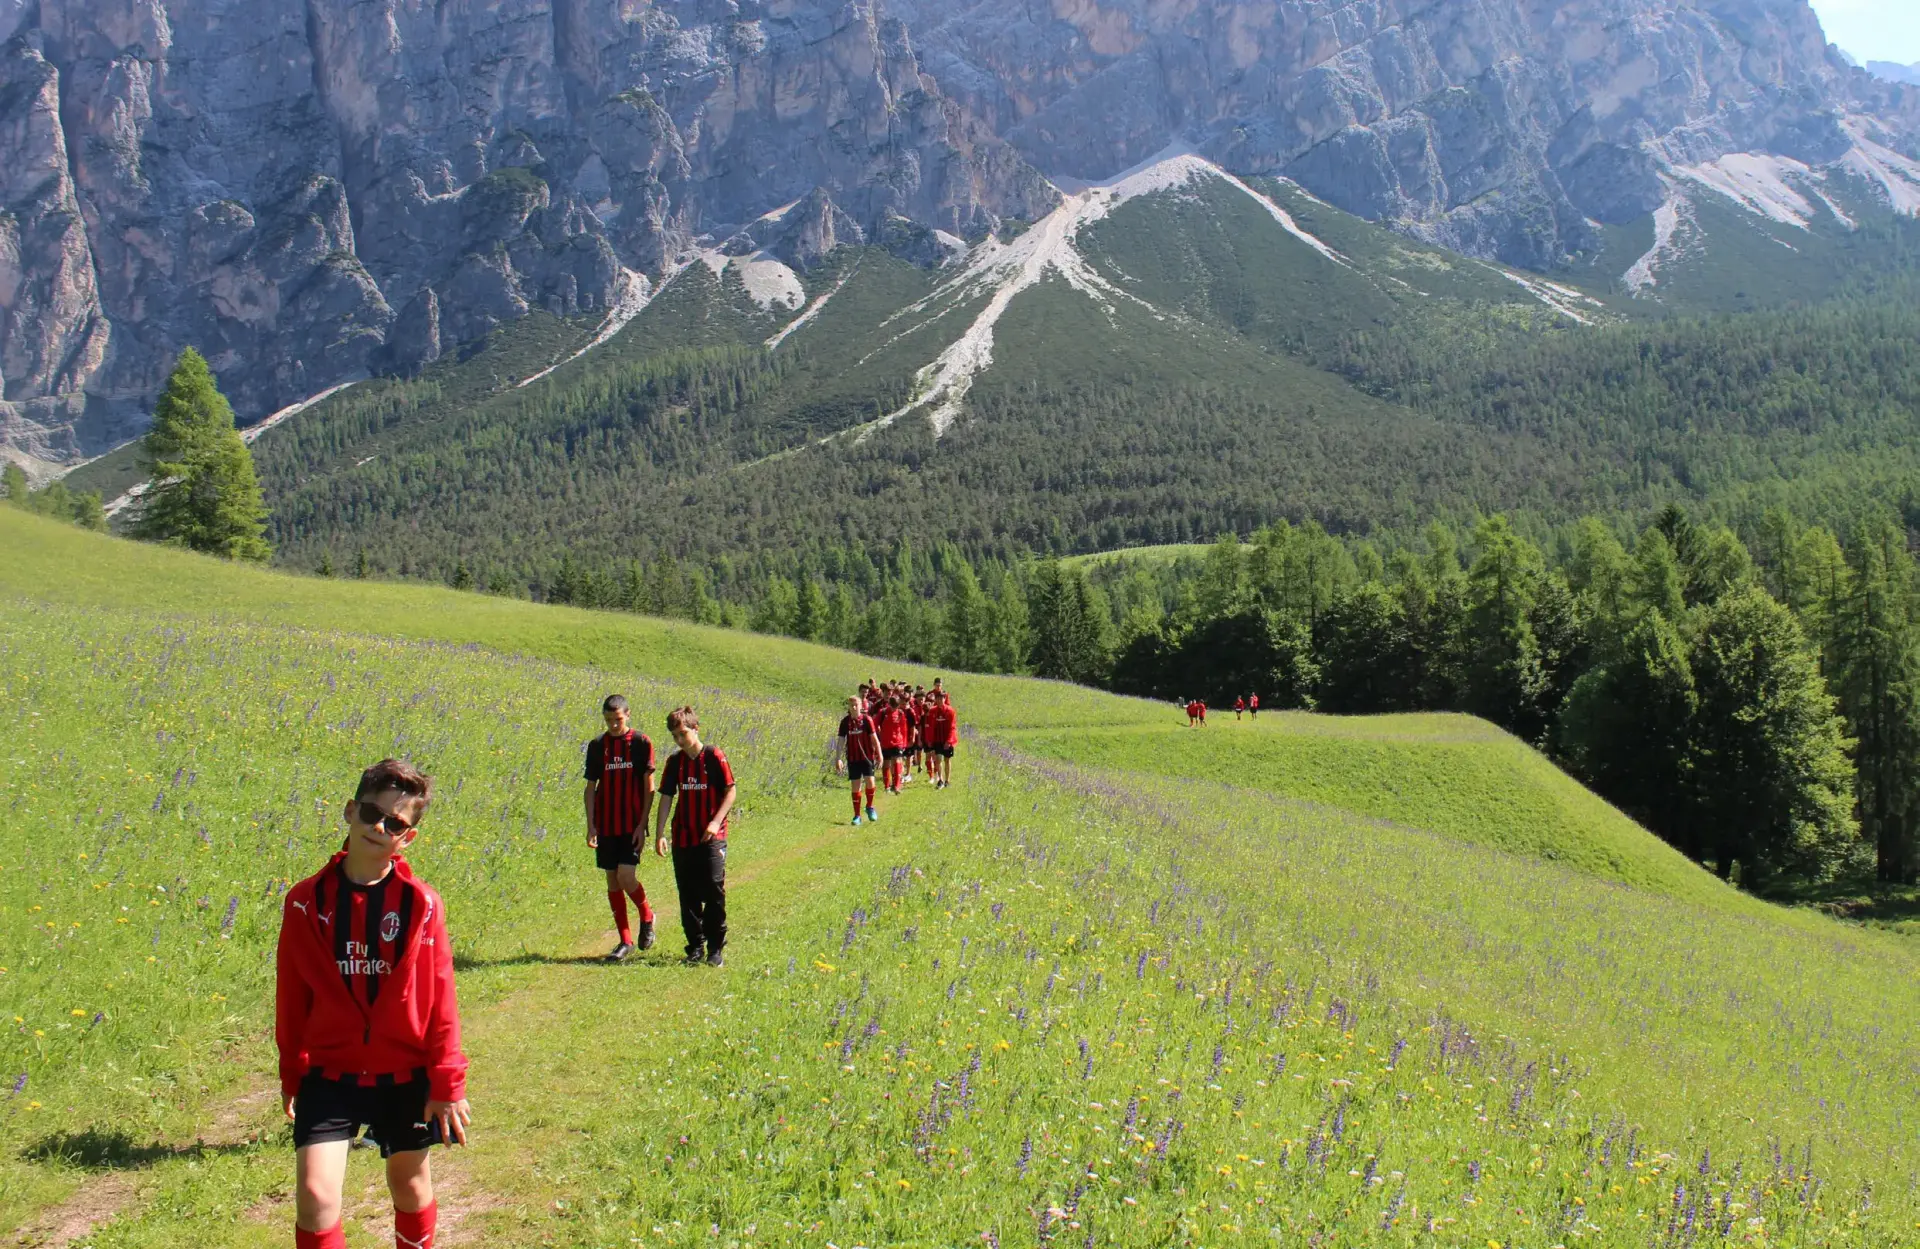 AC Milan Soccer Camp on Demand location is surrounded by greenery near the Dolomites